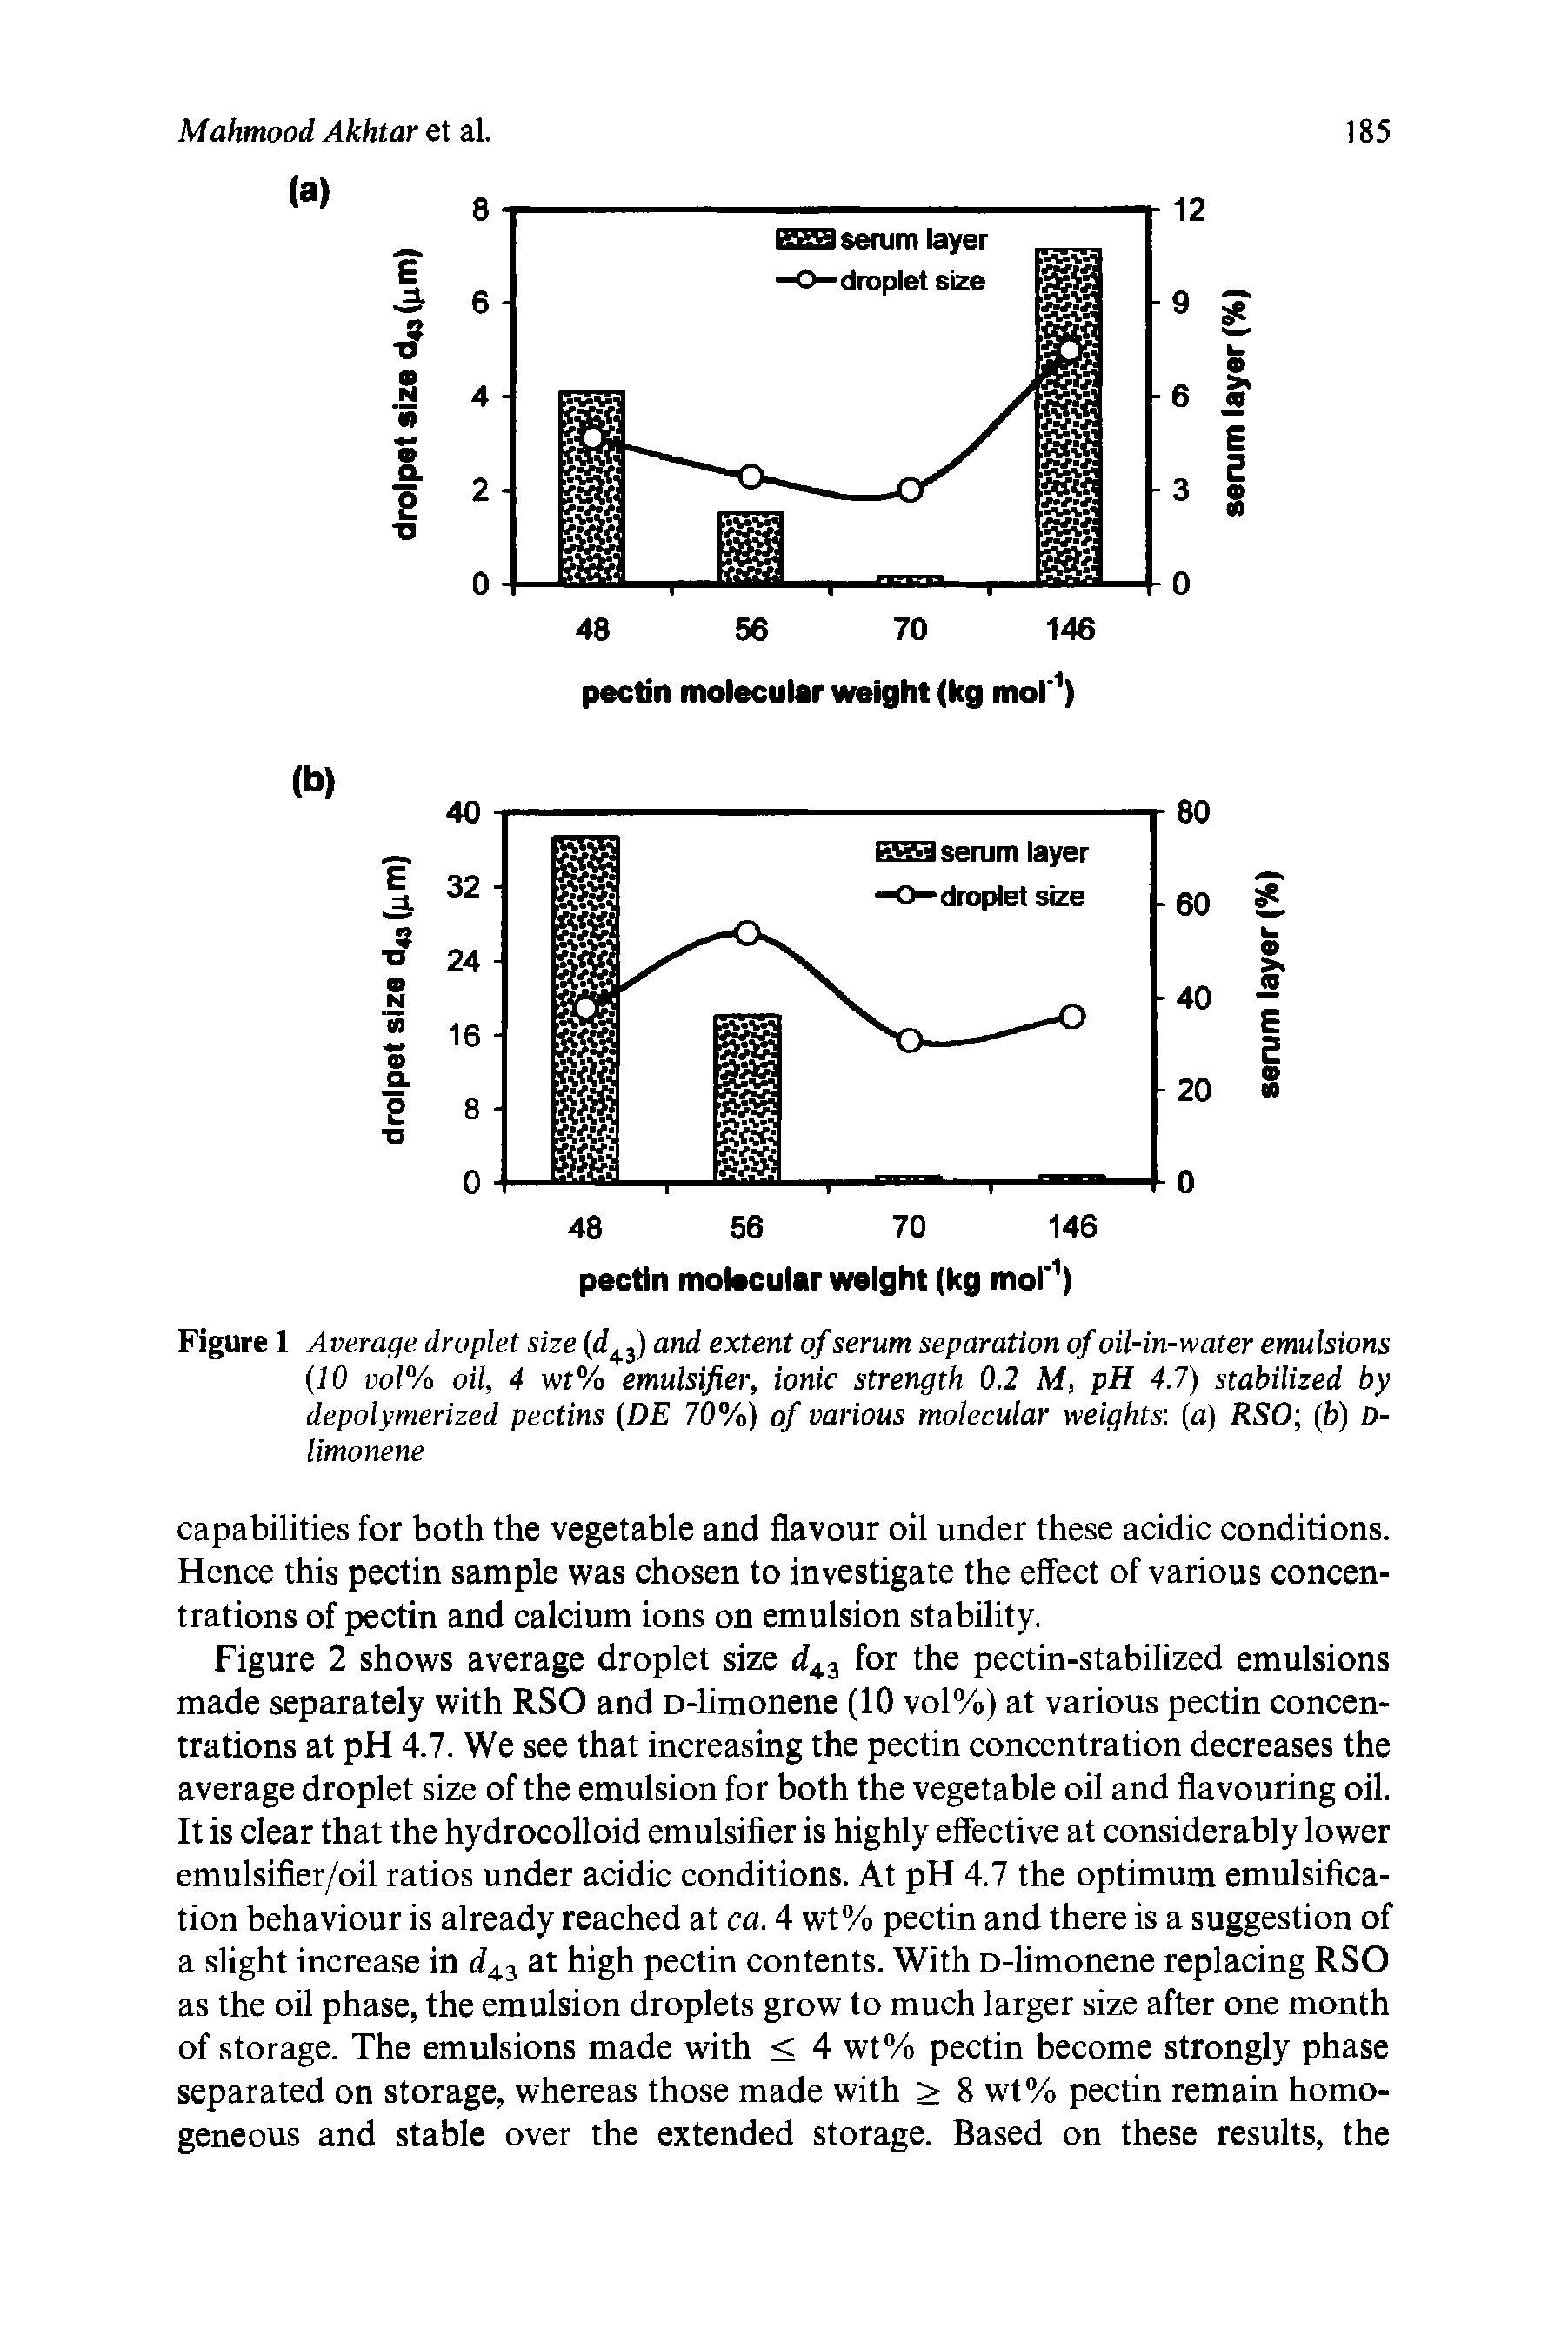 Figure 1 Average droplet size (d43) and extent of serum separation of oil-in-water emulsions (10 vol% oil, 4 wt% emulsifier, ionic strength 0.2 M, pH 4.7) stabilized by depolymerized pectins (DE 70%) of various molecular weights (a) RSO (b) D-limonene...